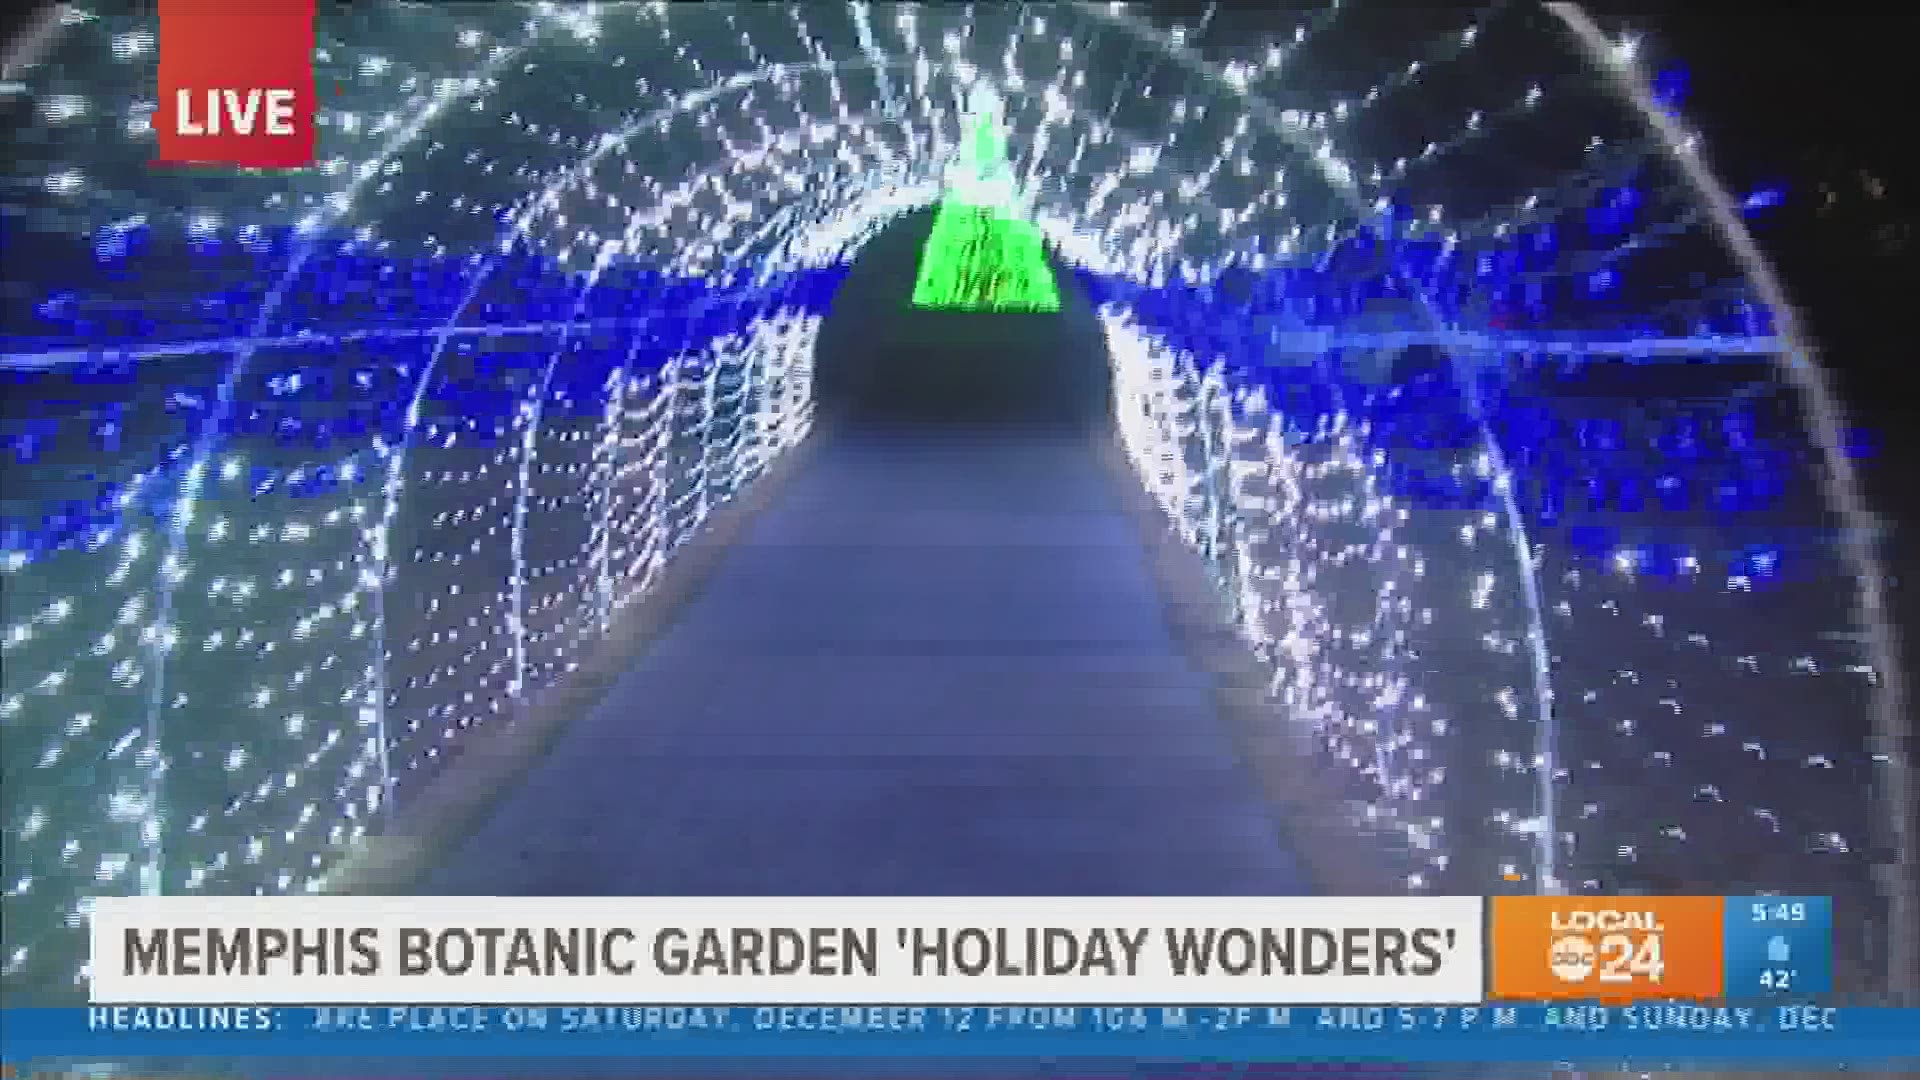 The annual Holiday Wonders at the Garden is back at the Memphis Botanic Garden